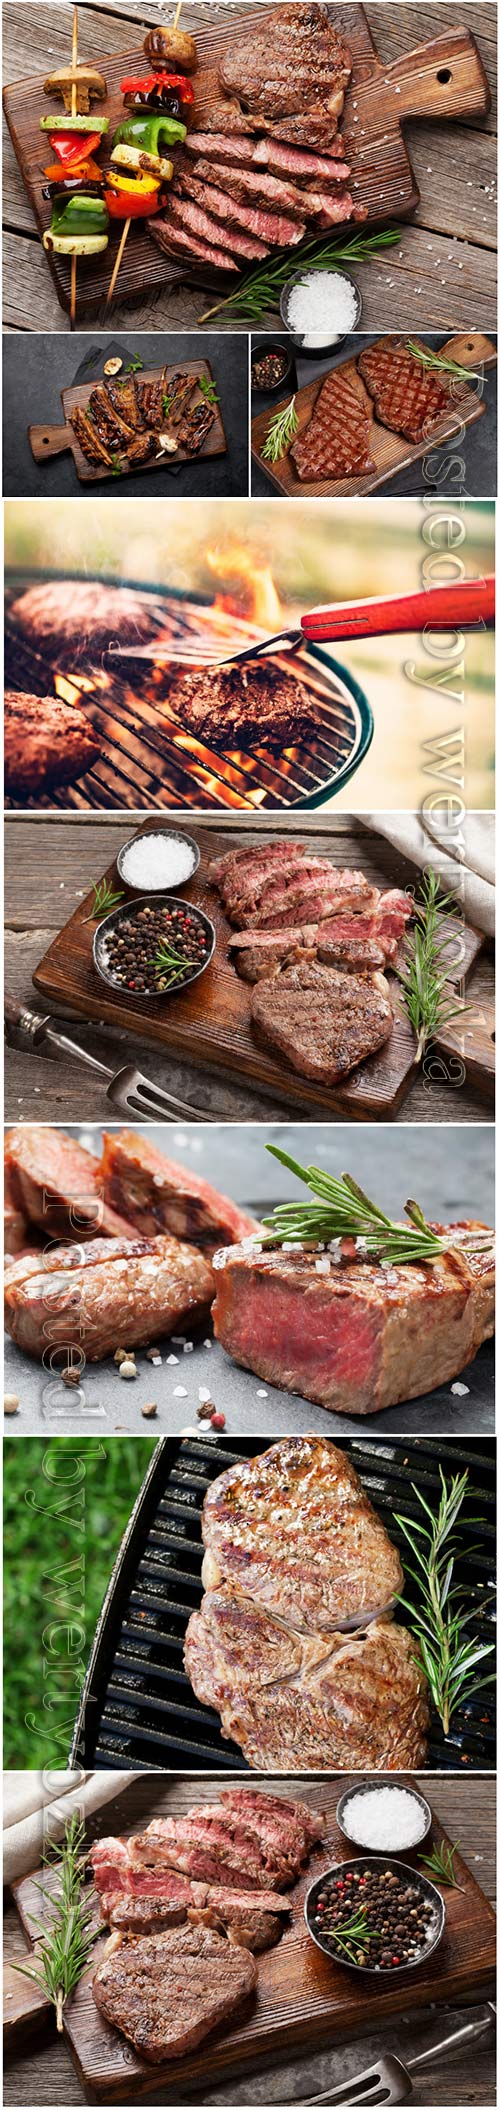 Meat, barbecue stock photo